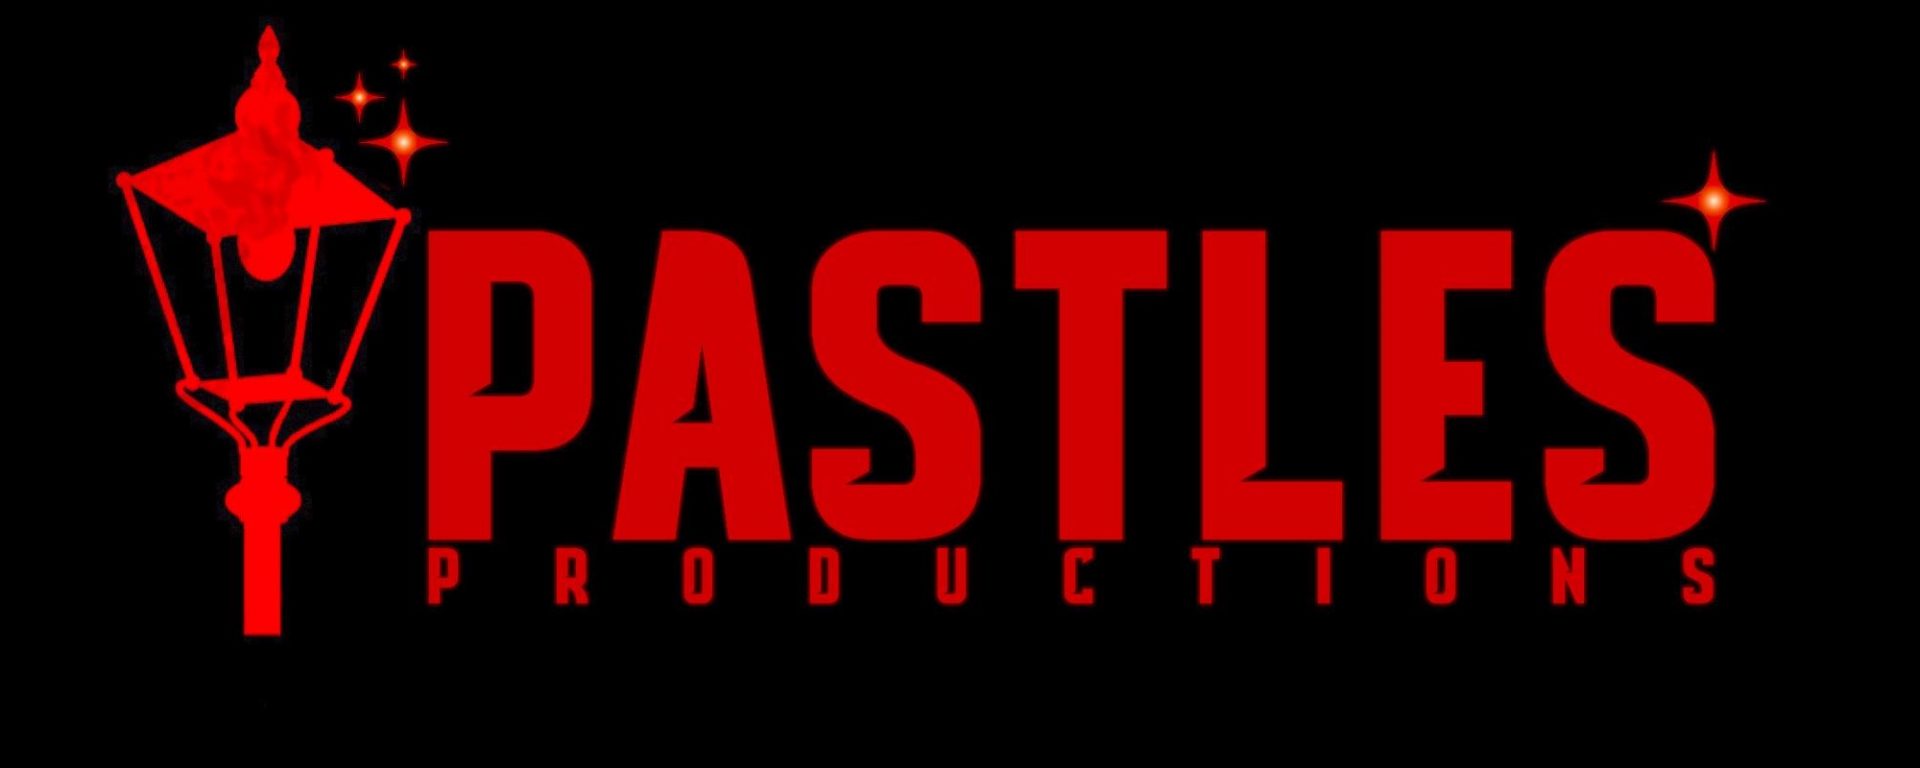 Website for the film and entertainment company, Pastels Productions Ltd